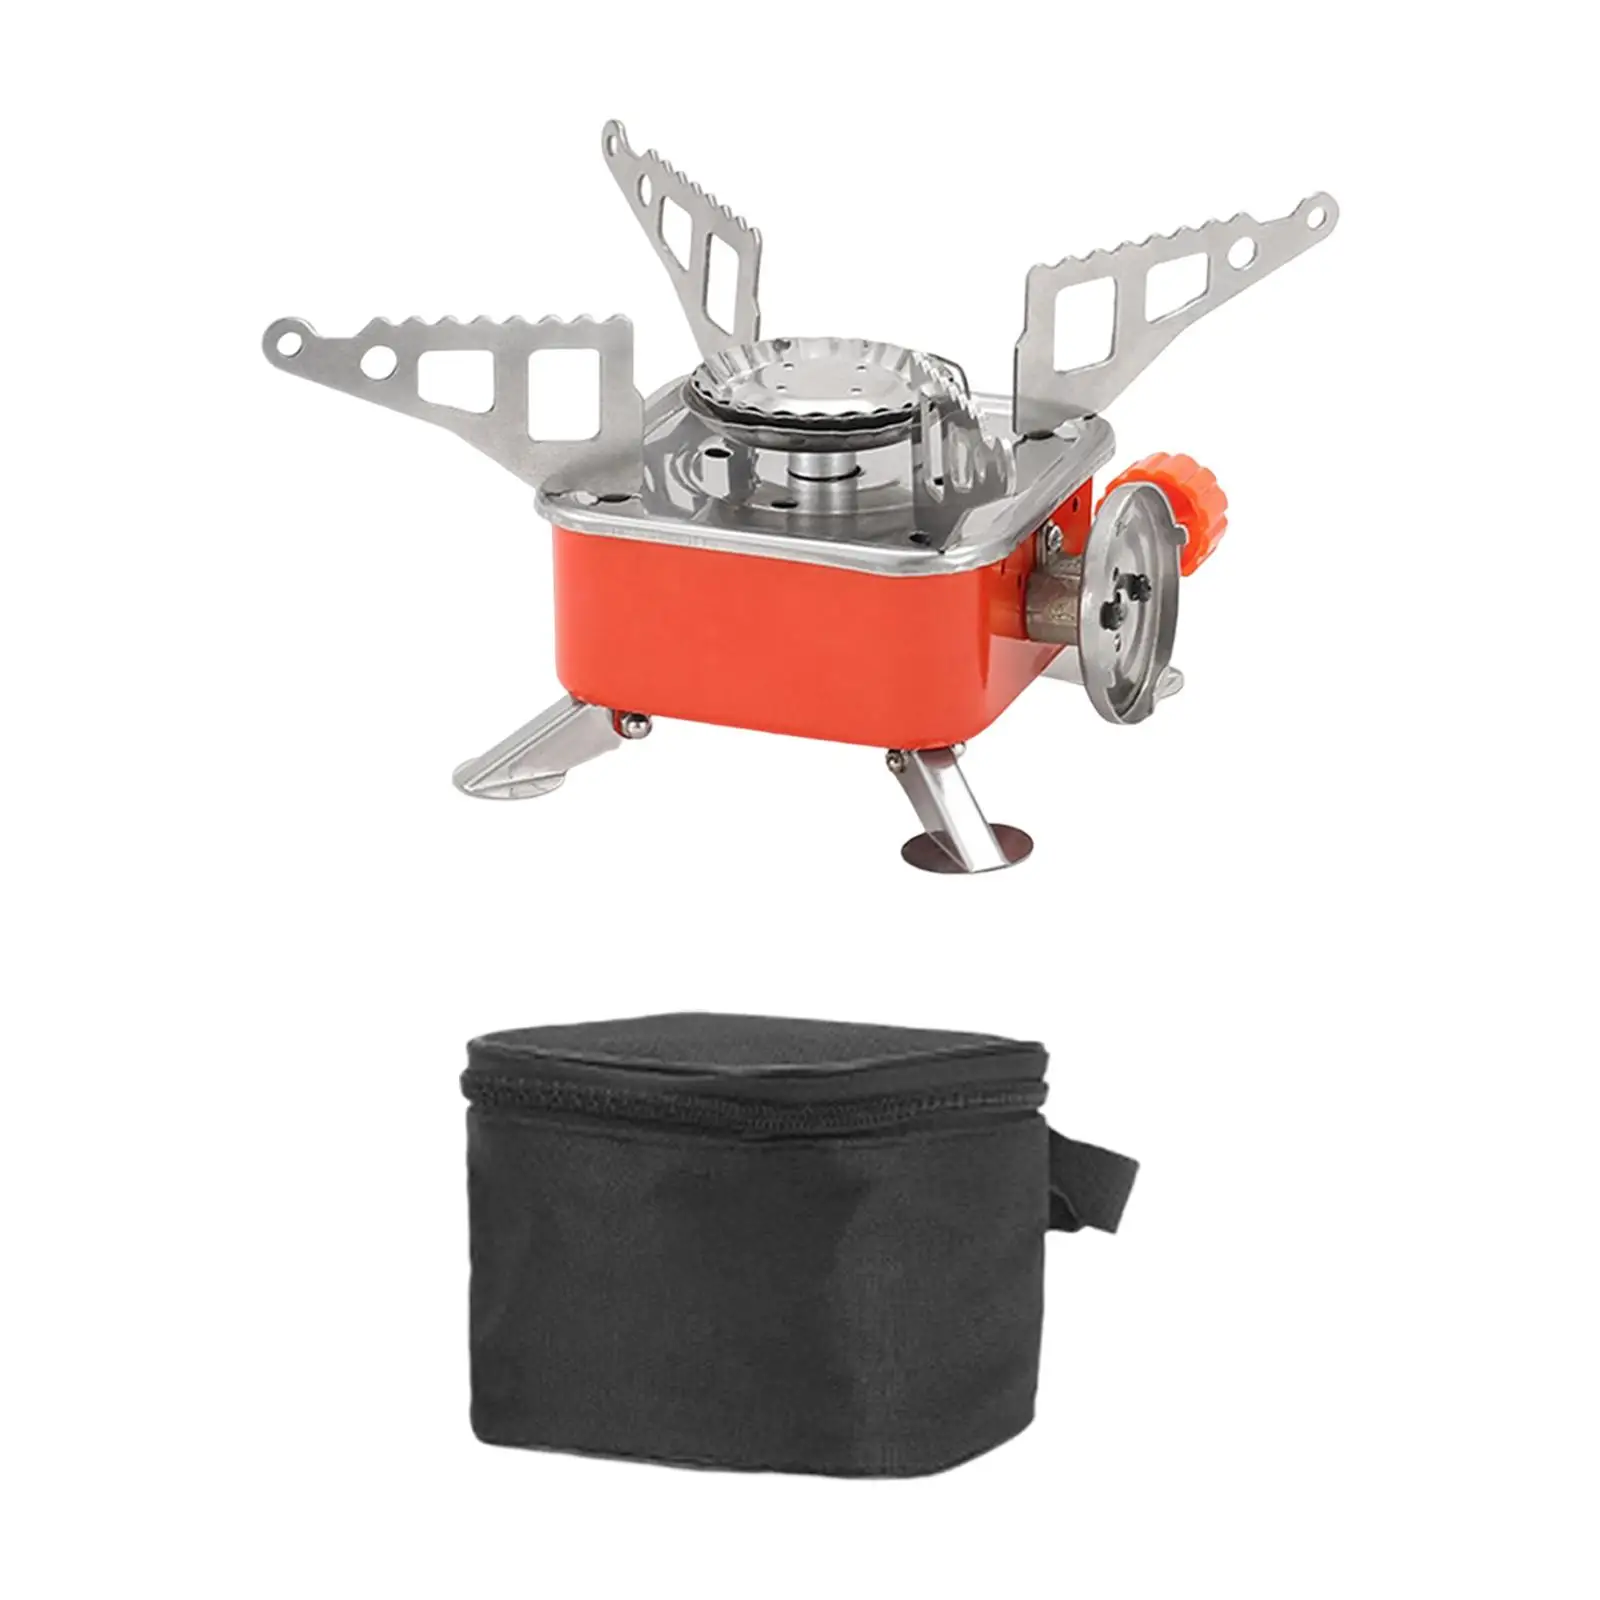 Camping Gas Stove with Storage Case Camp Stove Cooker Gear for Fishing